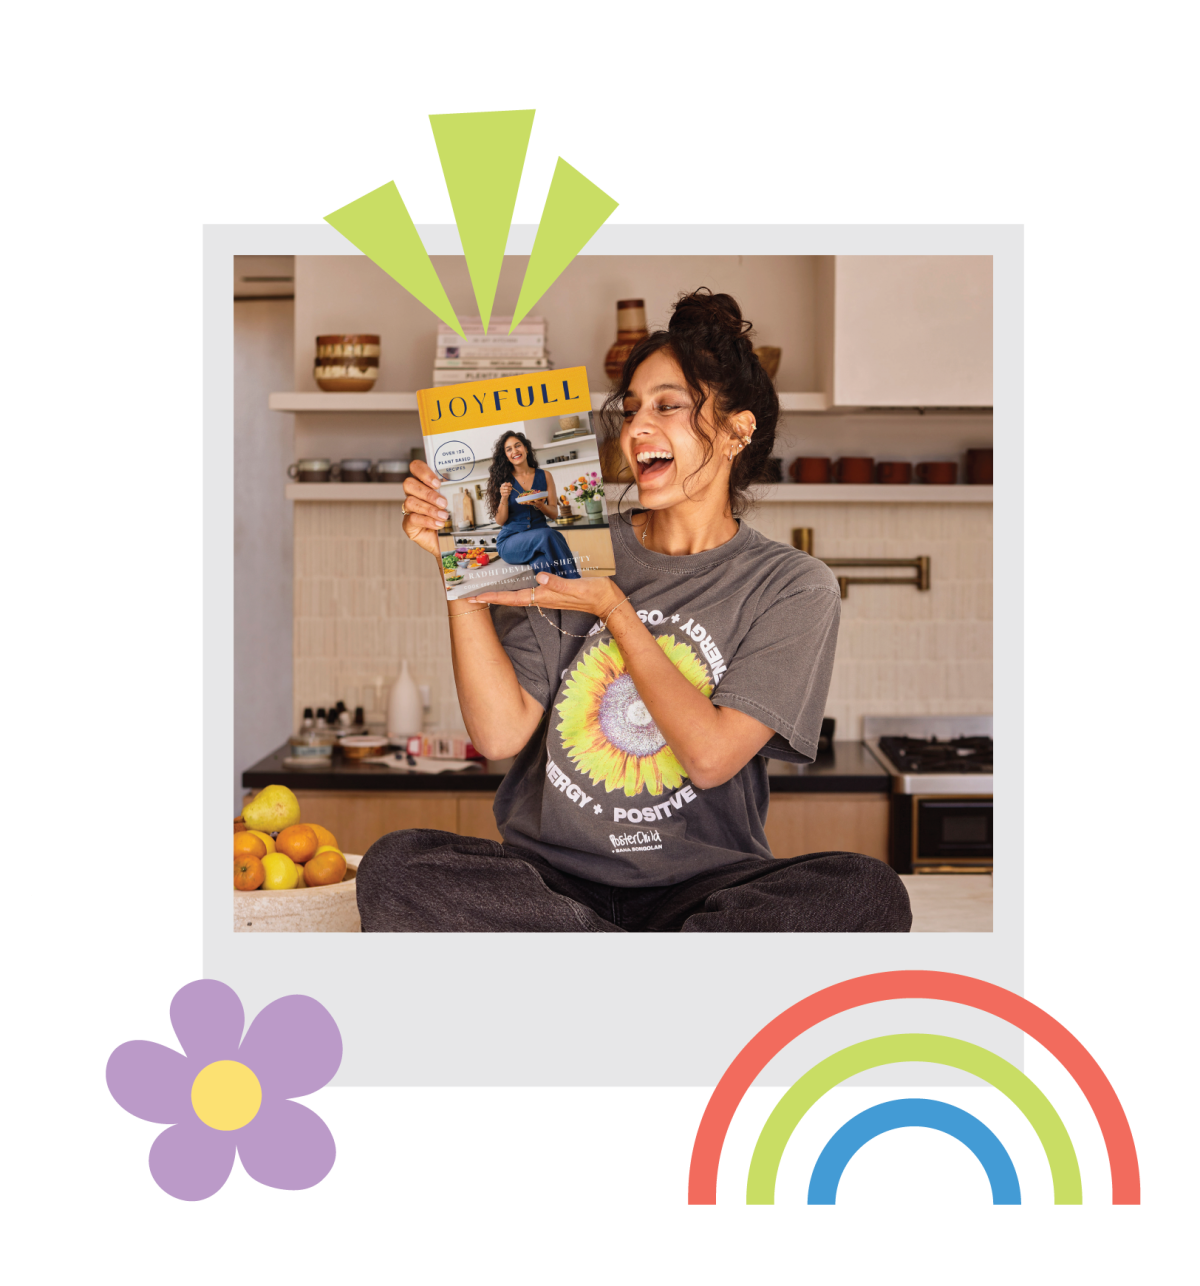 Photo illustration in shape of polaroid photo of woman holding a book, with illustrations of rainbow, flower and triangles.